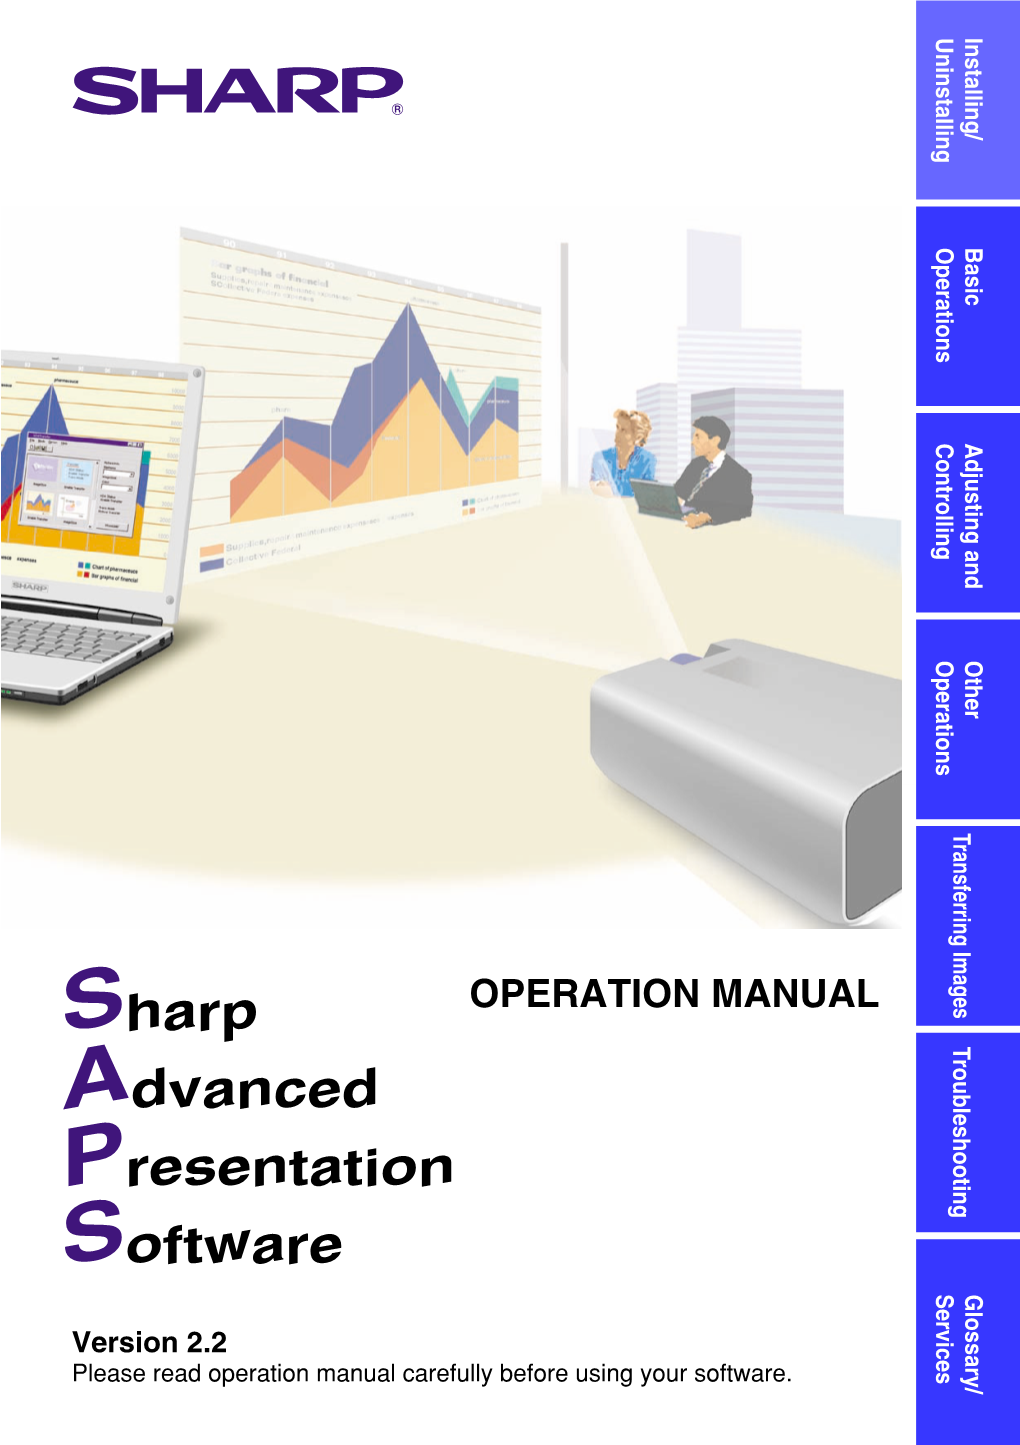 Sharp Advanced Presentation Software Is Subject to Change Without Prior Notice for Upgrading and Improvement